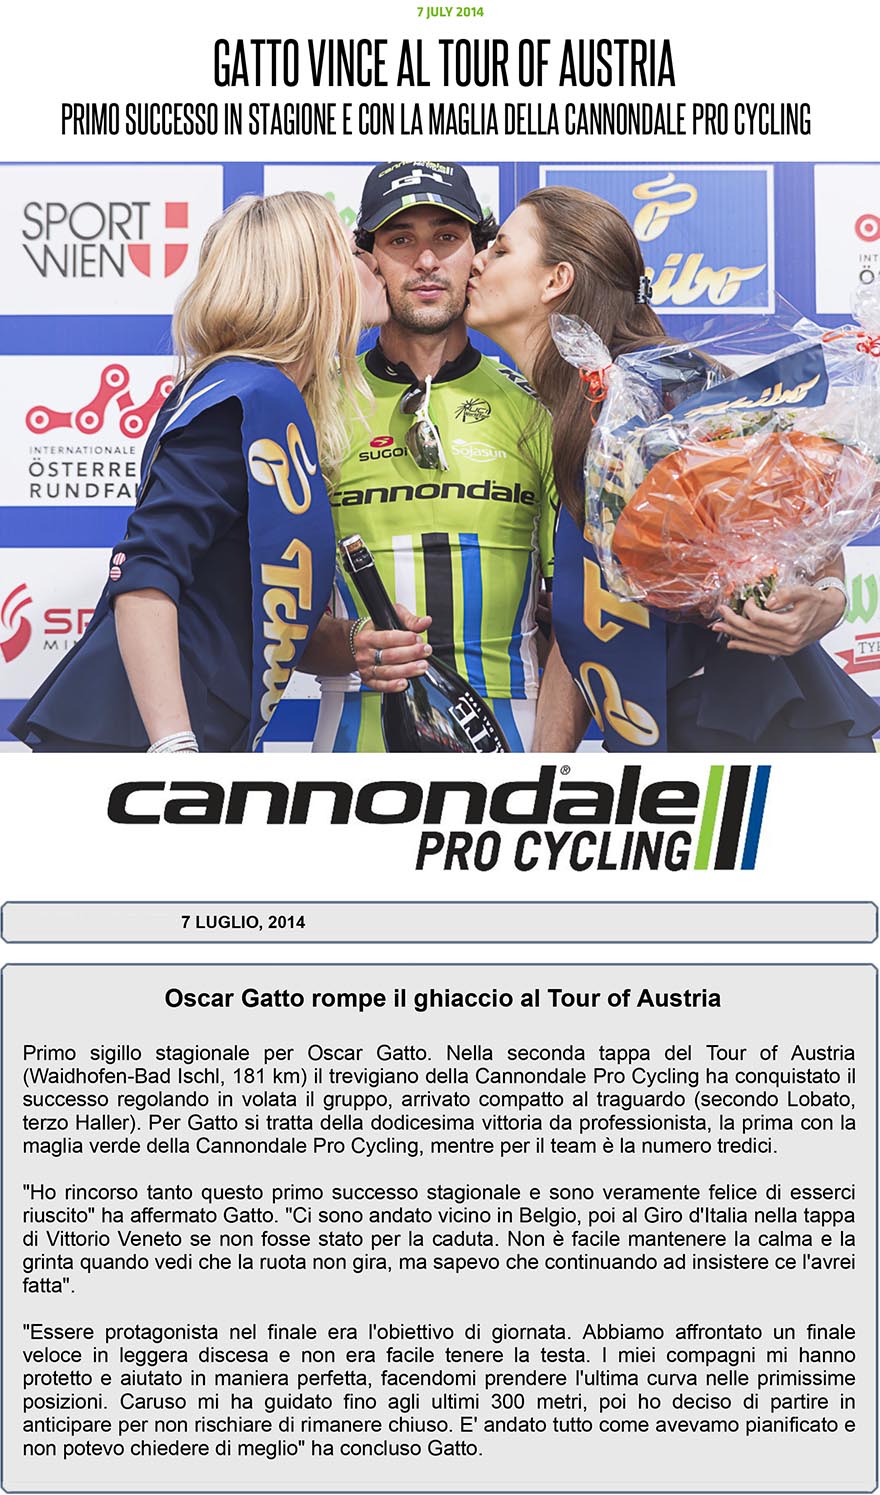 oscar gatto vince in austra Cannondale